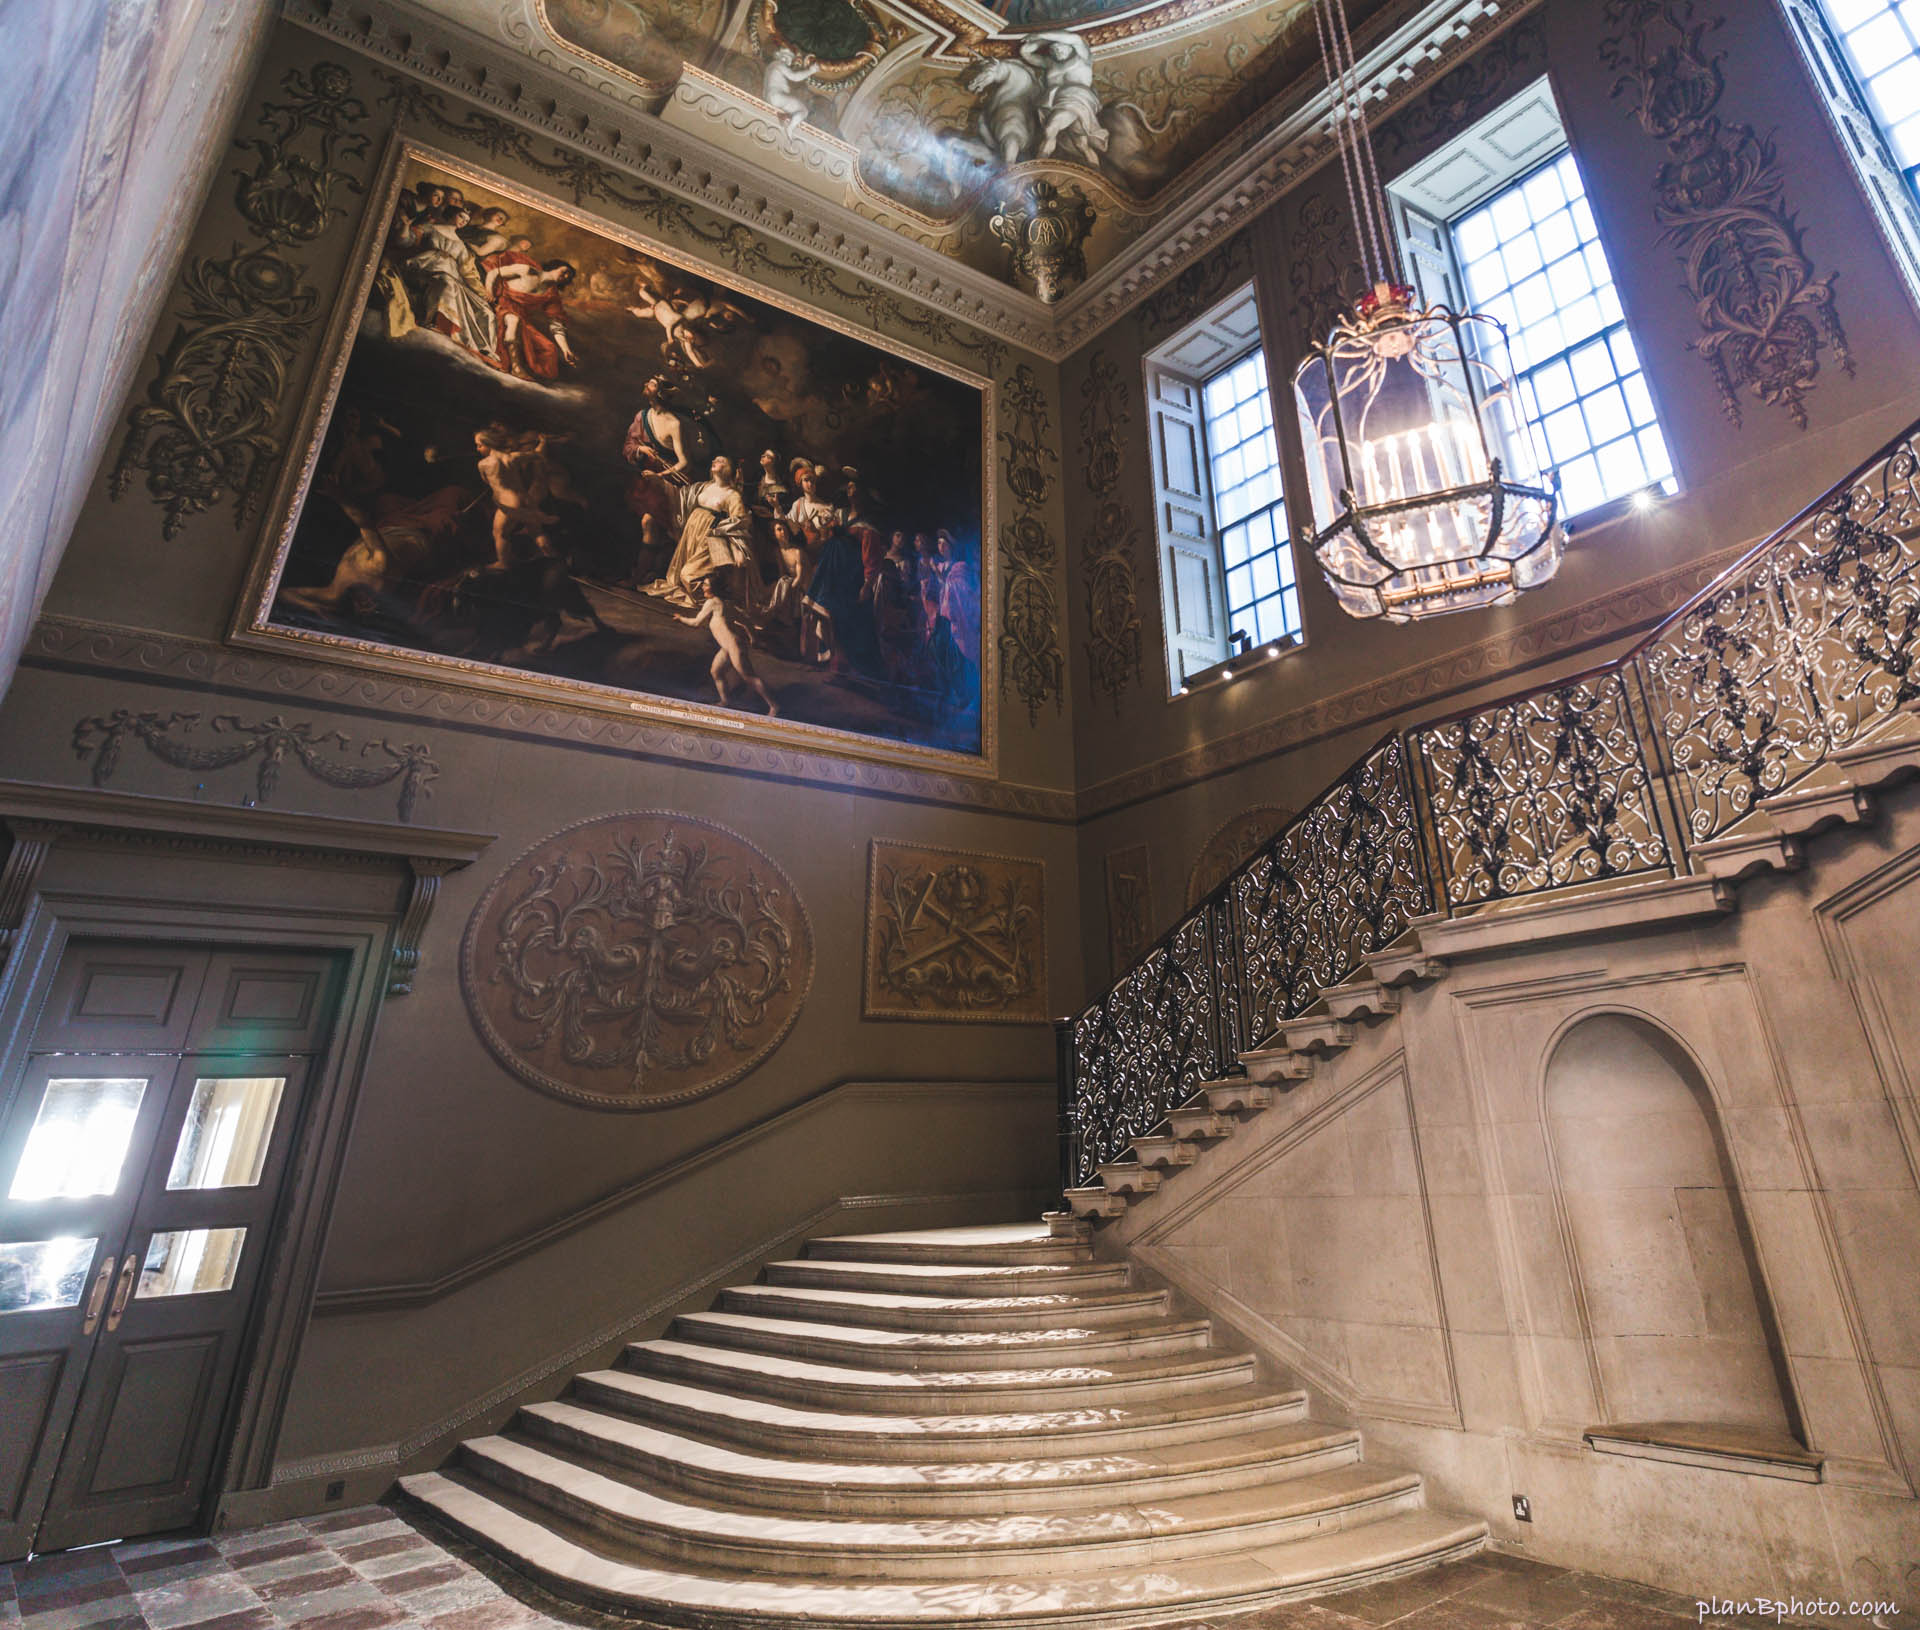 Queen's staircase in Hampton Court palace